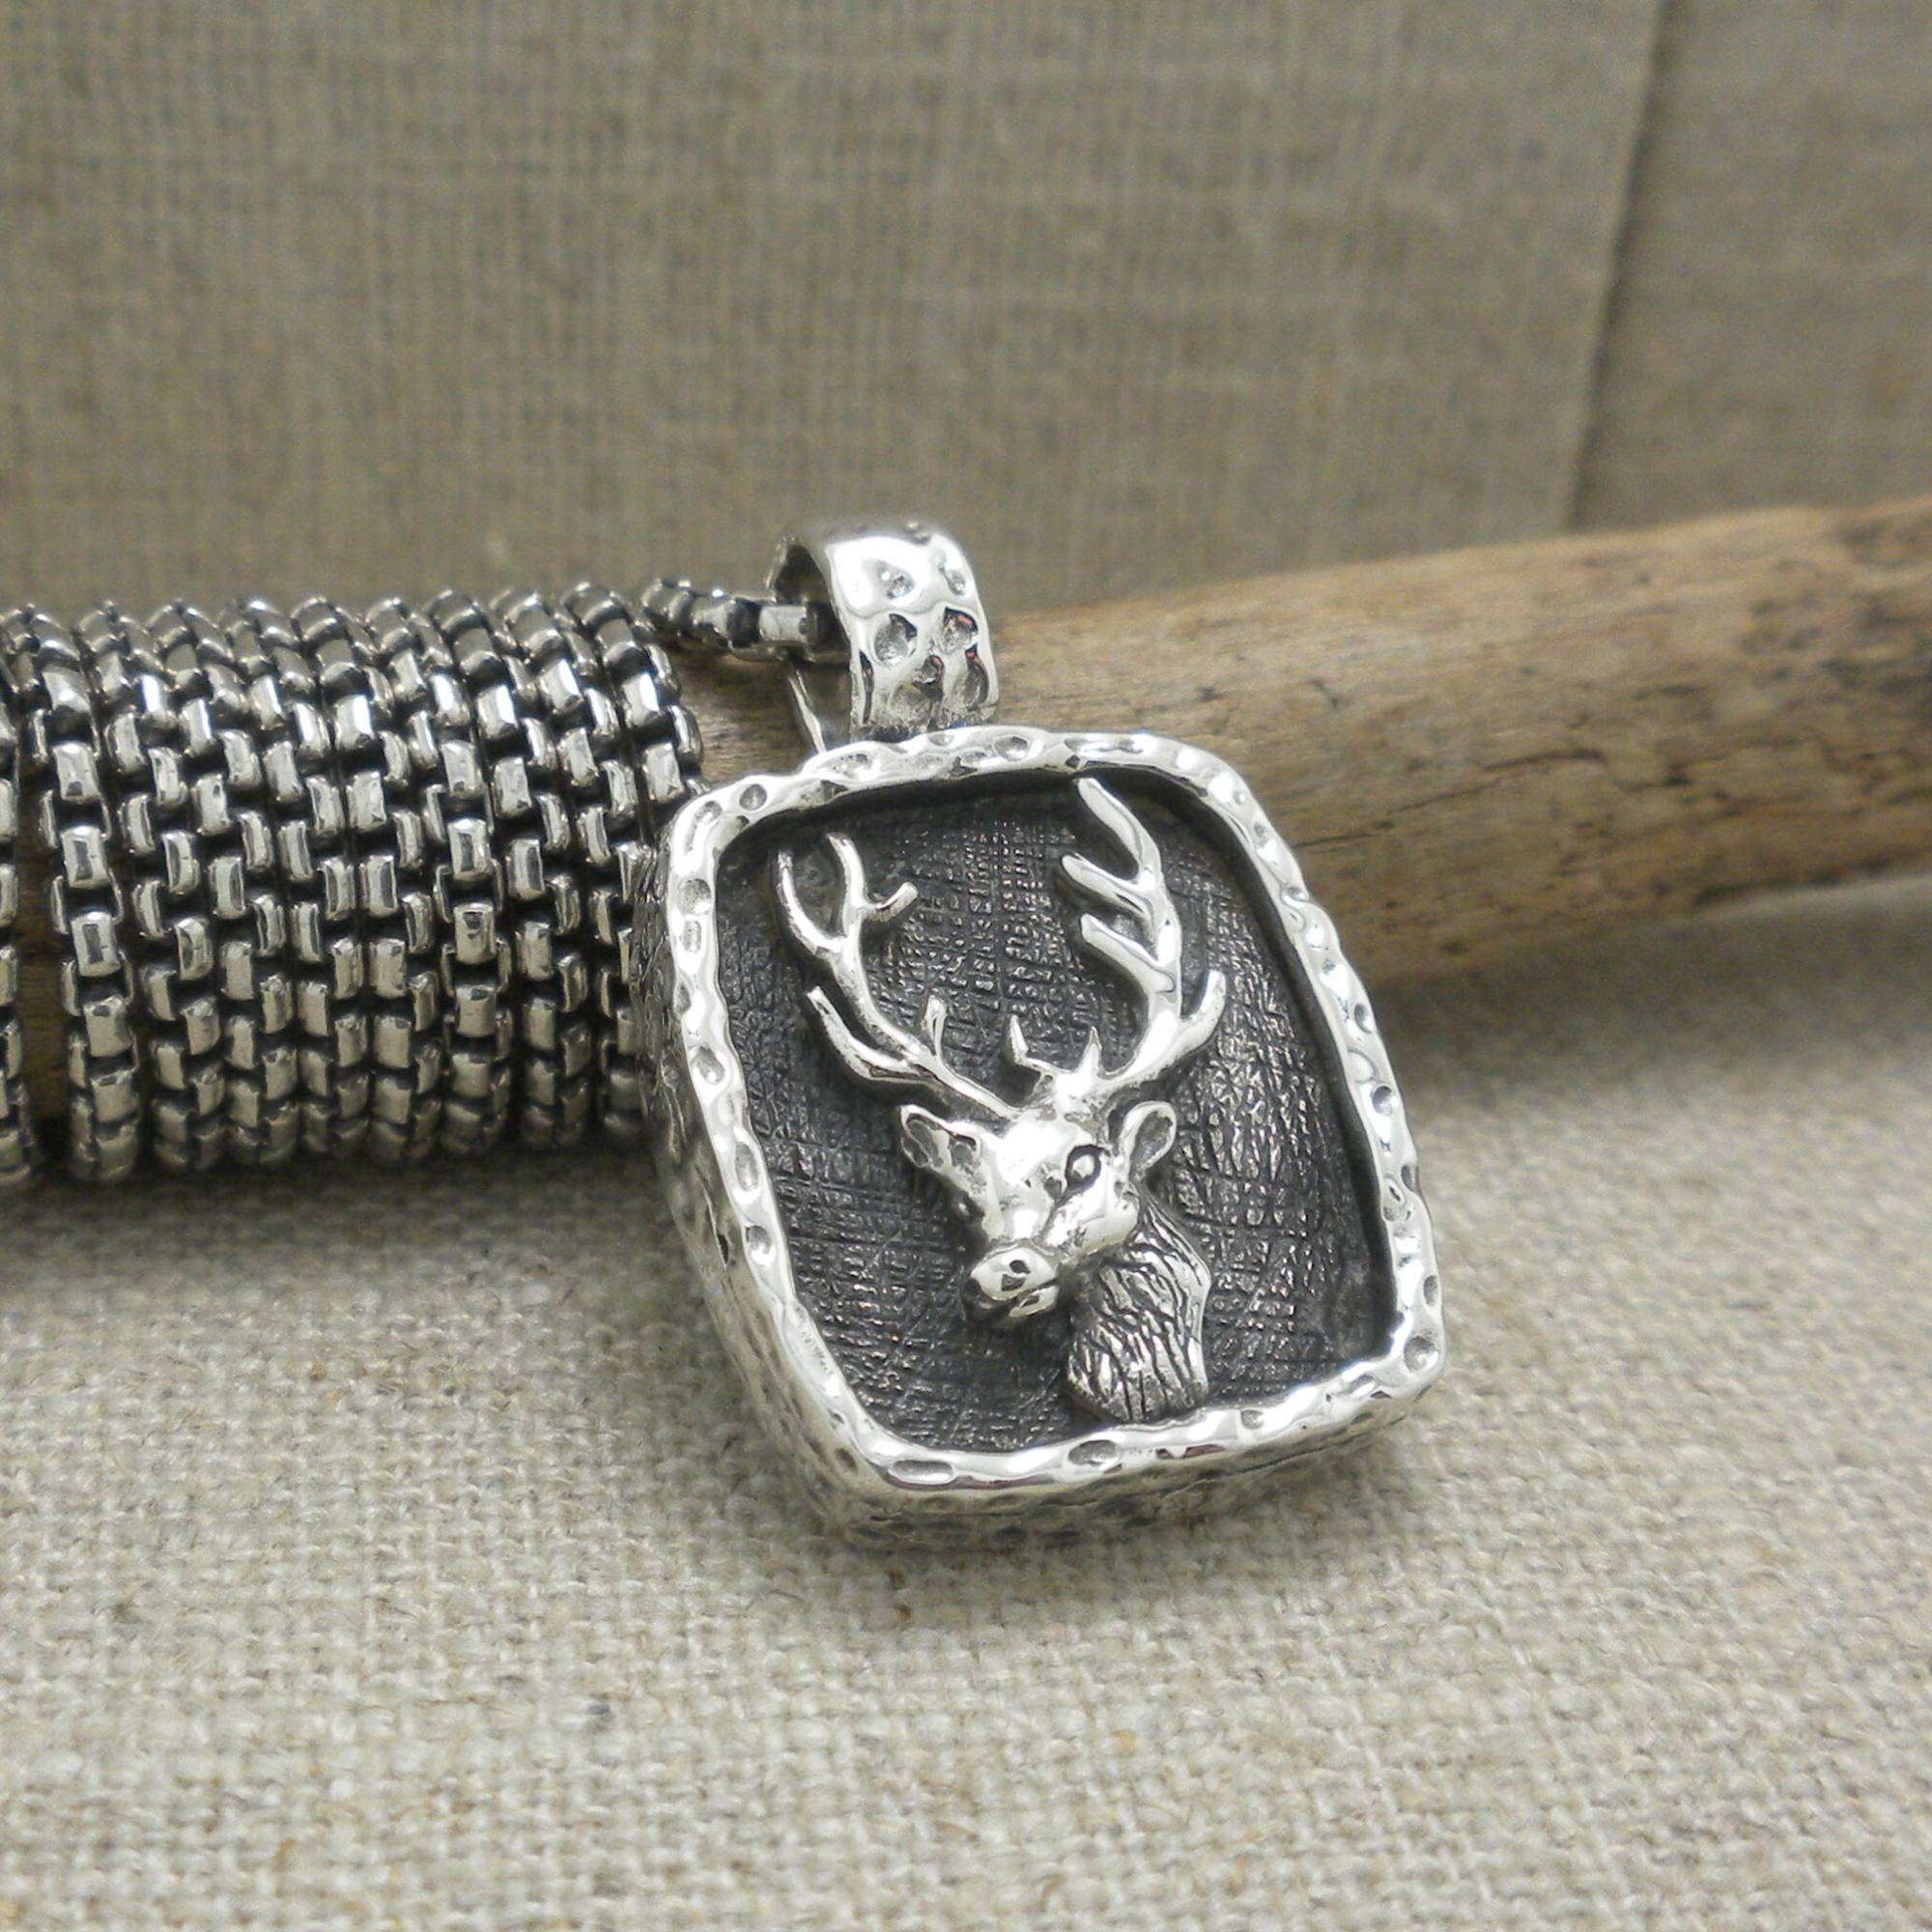 Keith Jack Wild soulds Stag Pendant